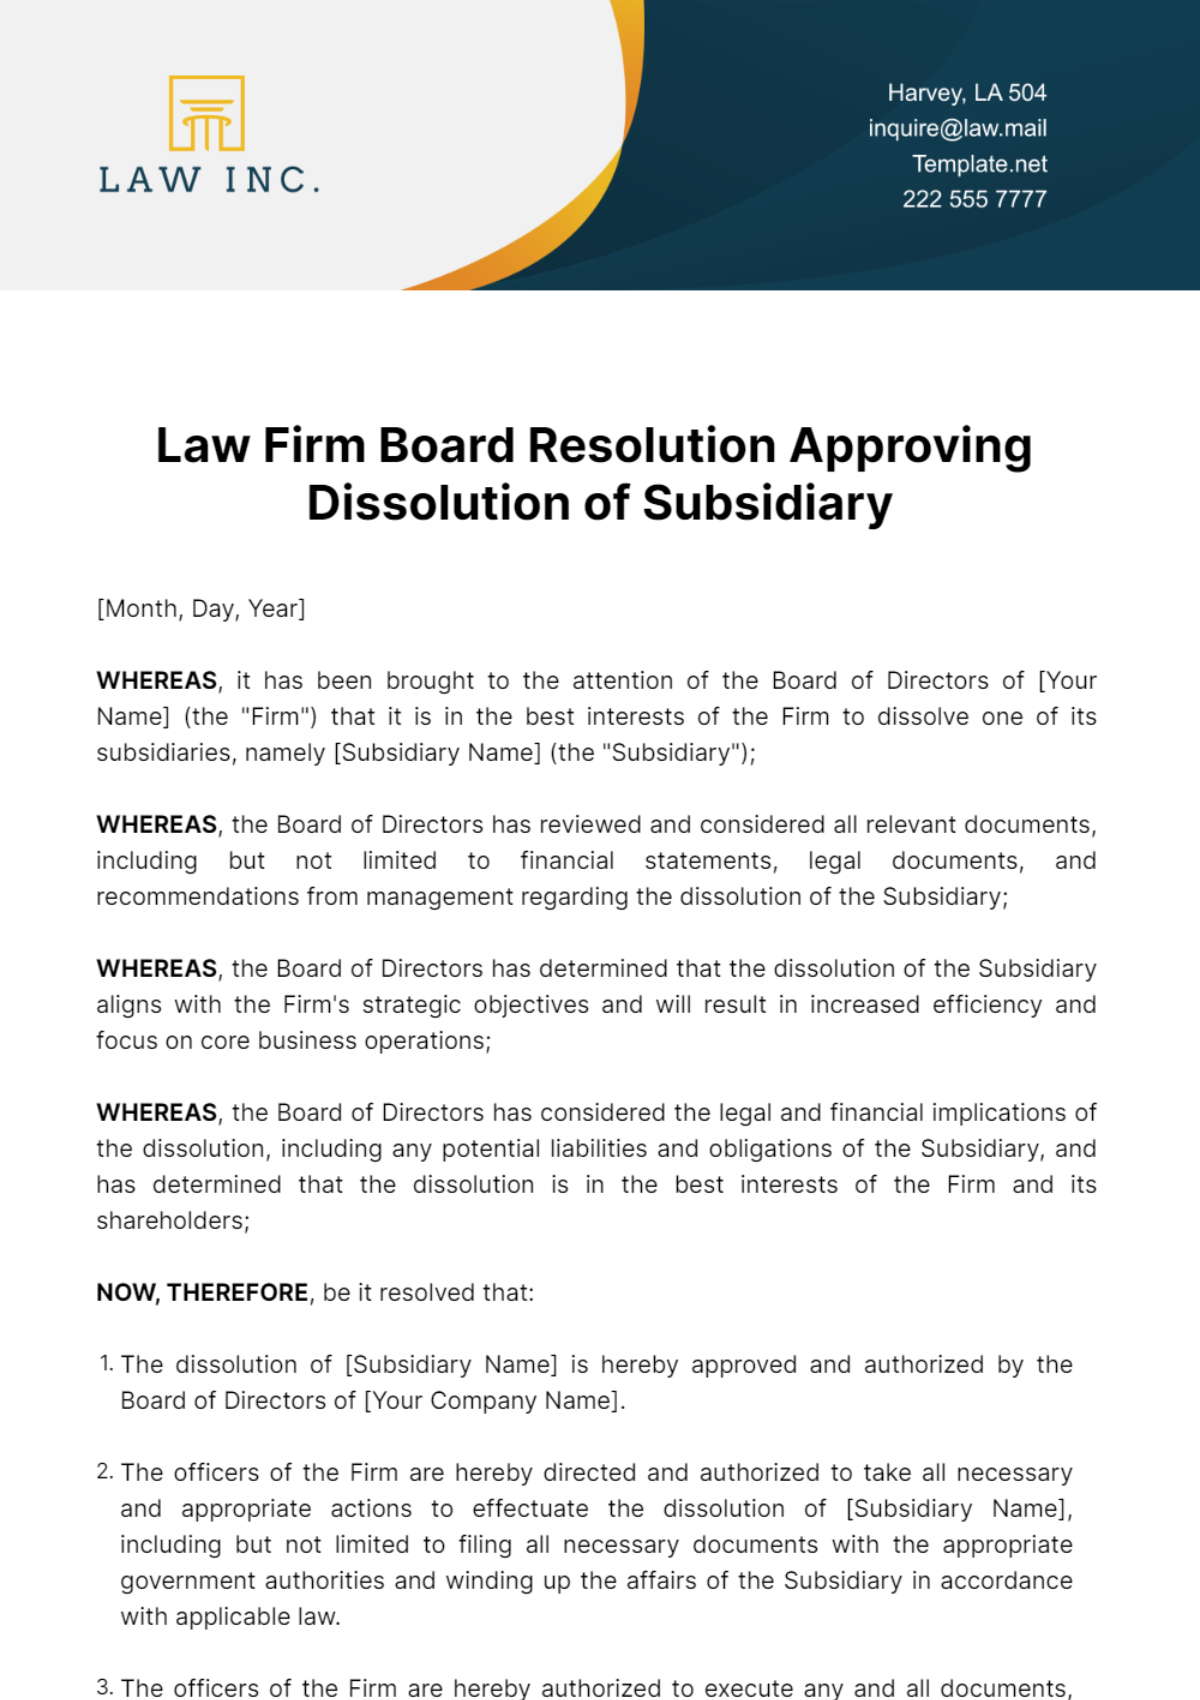 Law Firm Board Resolution Approving Dissolution of Subsidiary Template